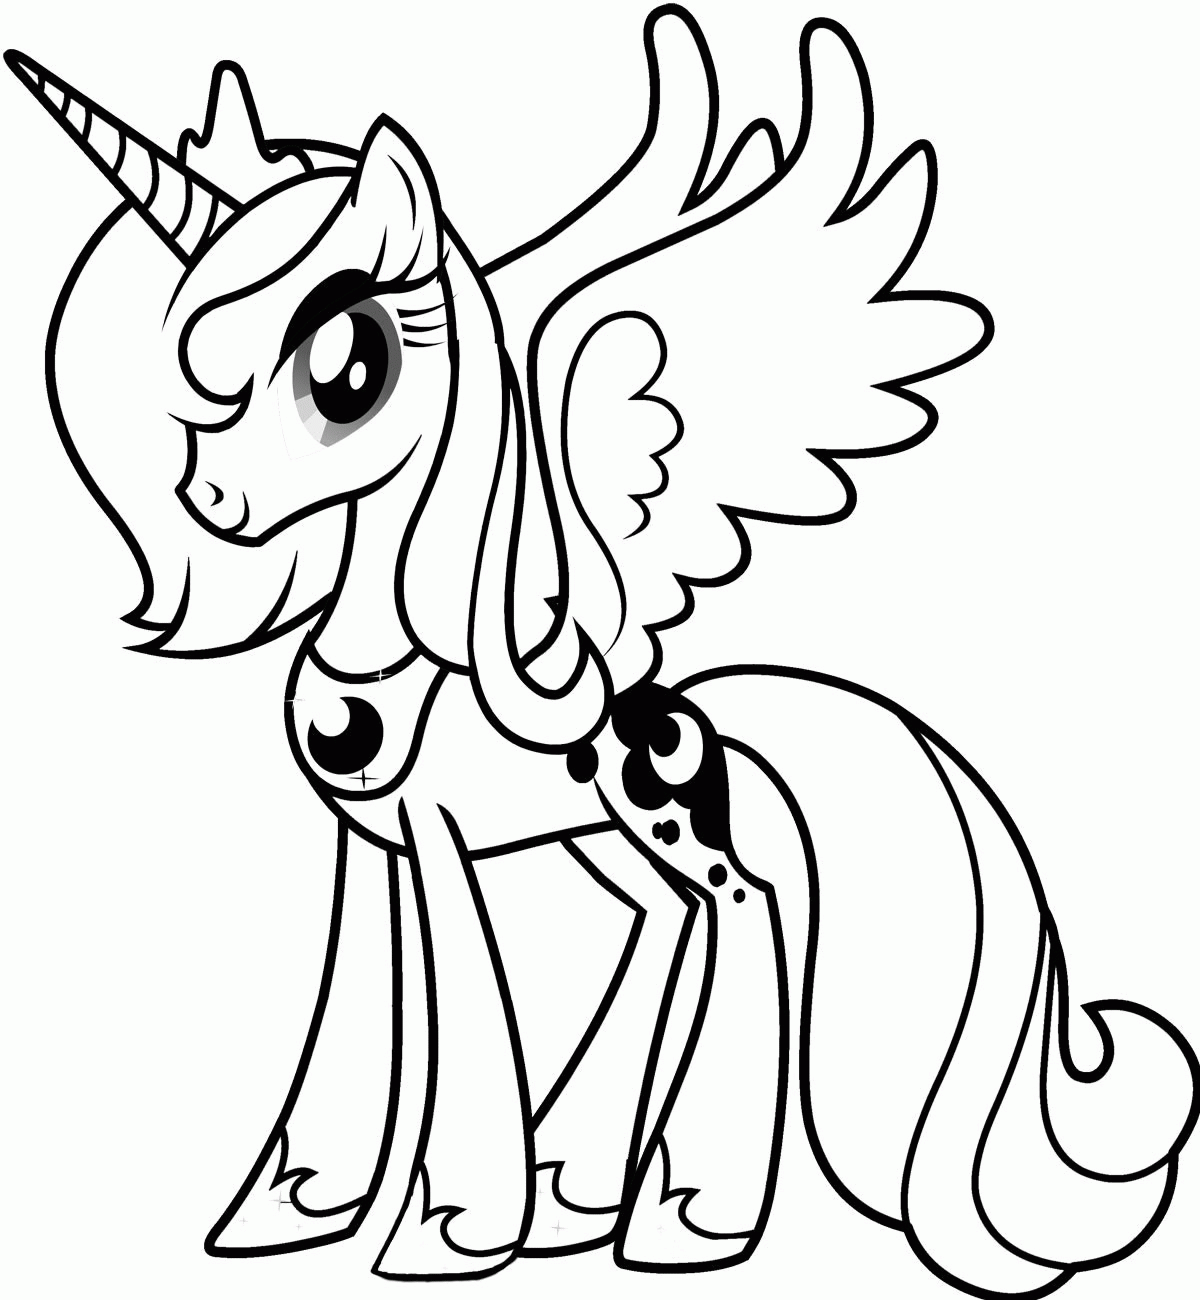 Essay My Little Pony Nightmare Moon Coloring Pages - Coloring Home